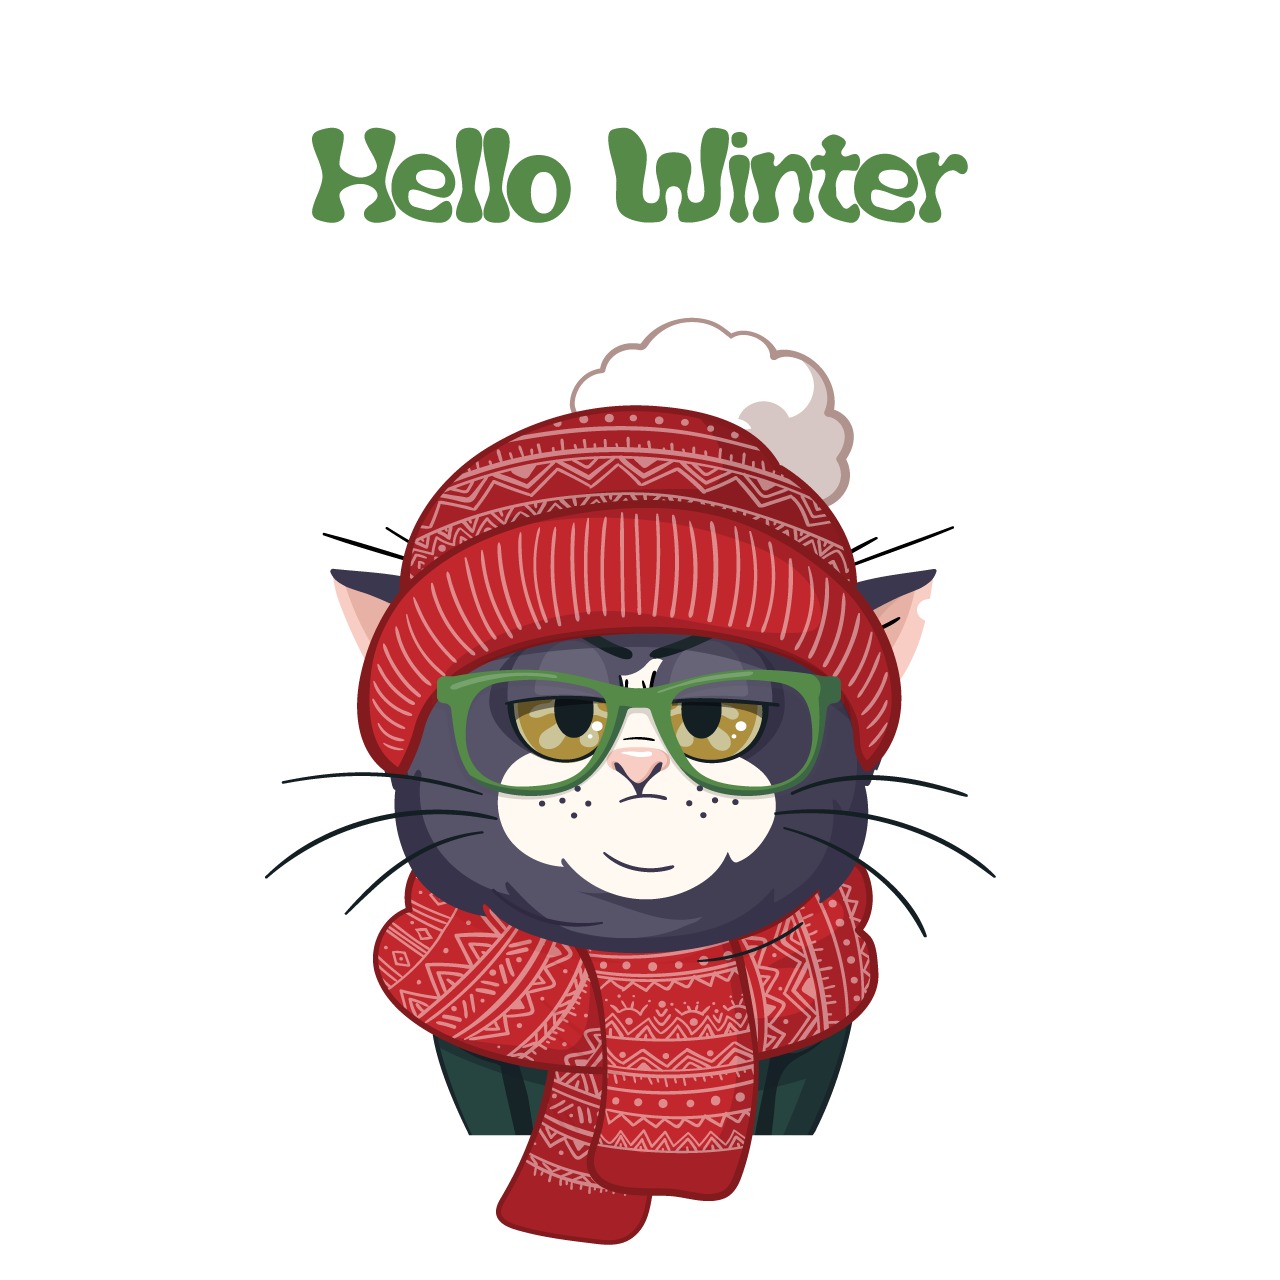 Hi clipart cute gray cat knitted hat scarf hello winter cute character winter